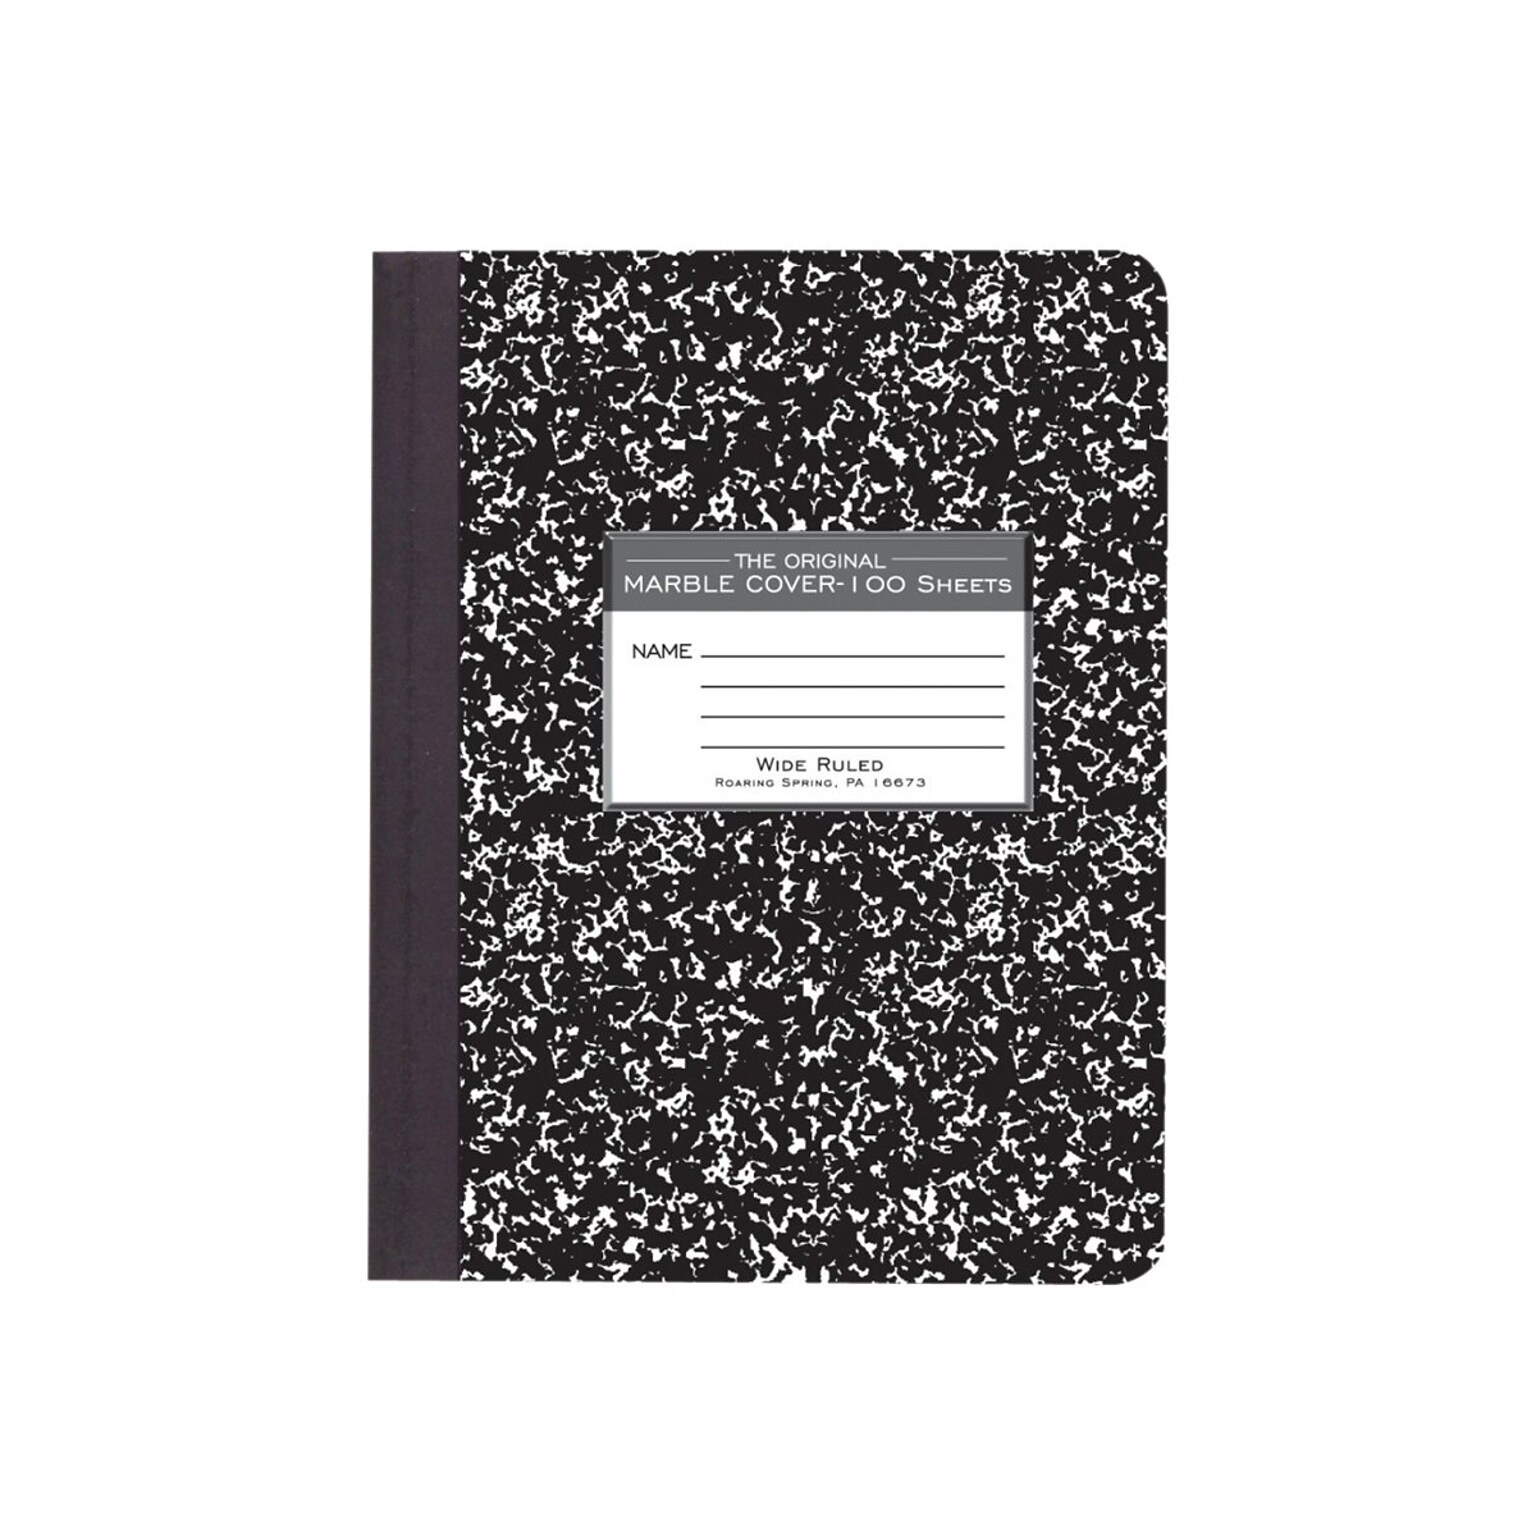 Roaring Spring Paper Products Composition Notebooks, 9.75 x 7.5, Wide Ruled, 100 Sheets, Black (77230)